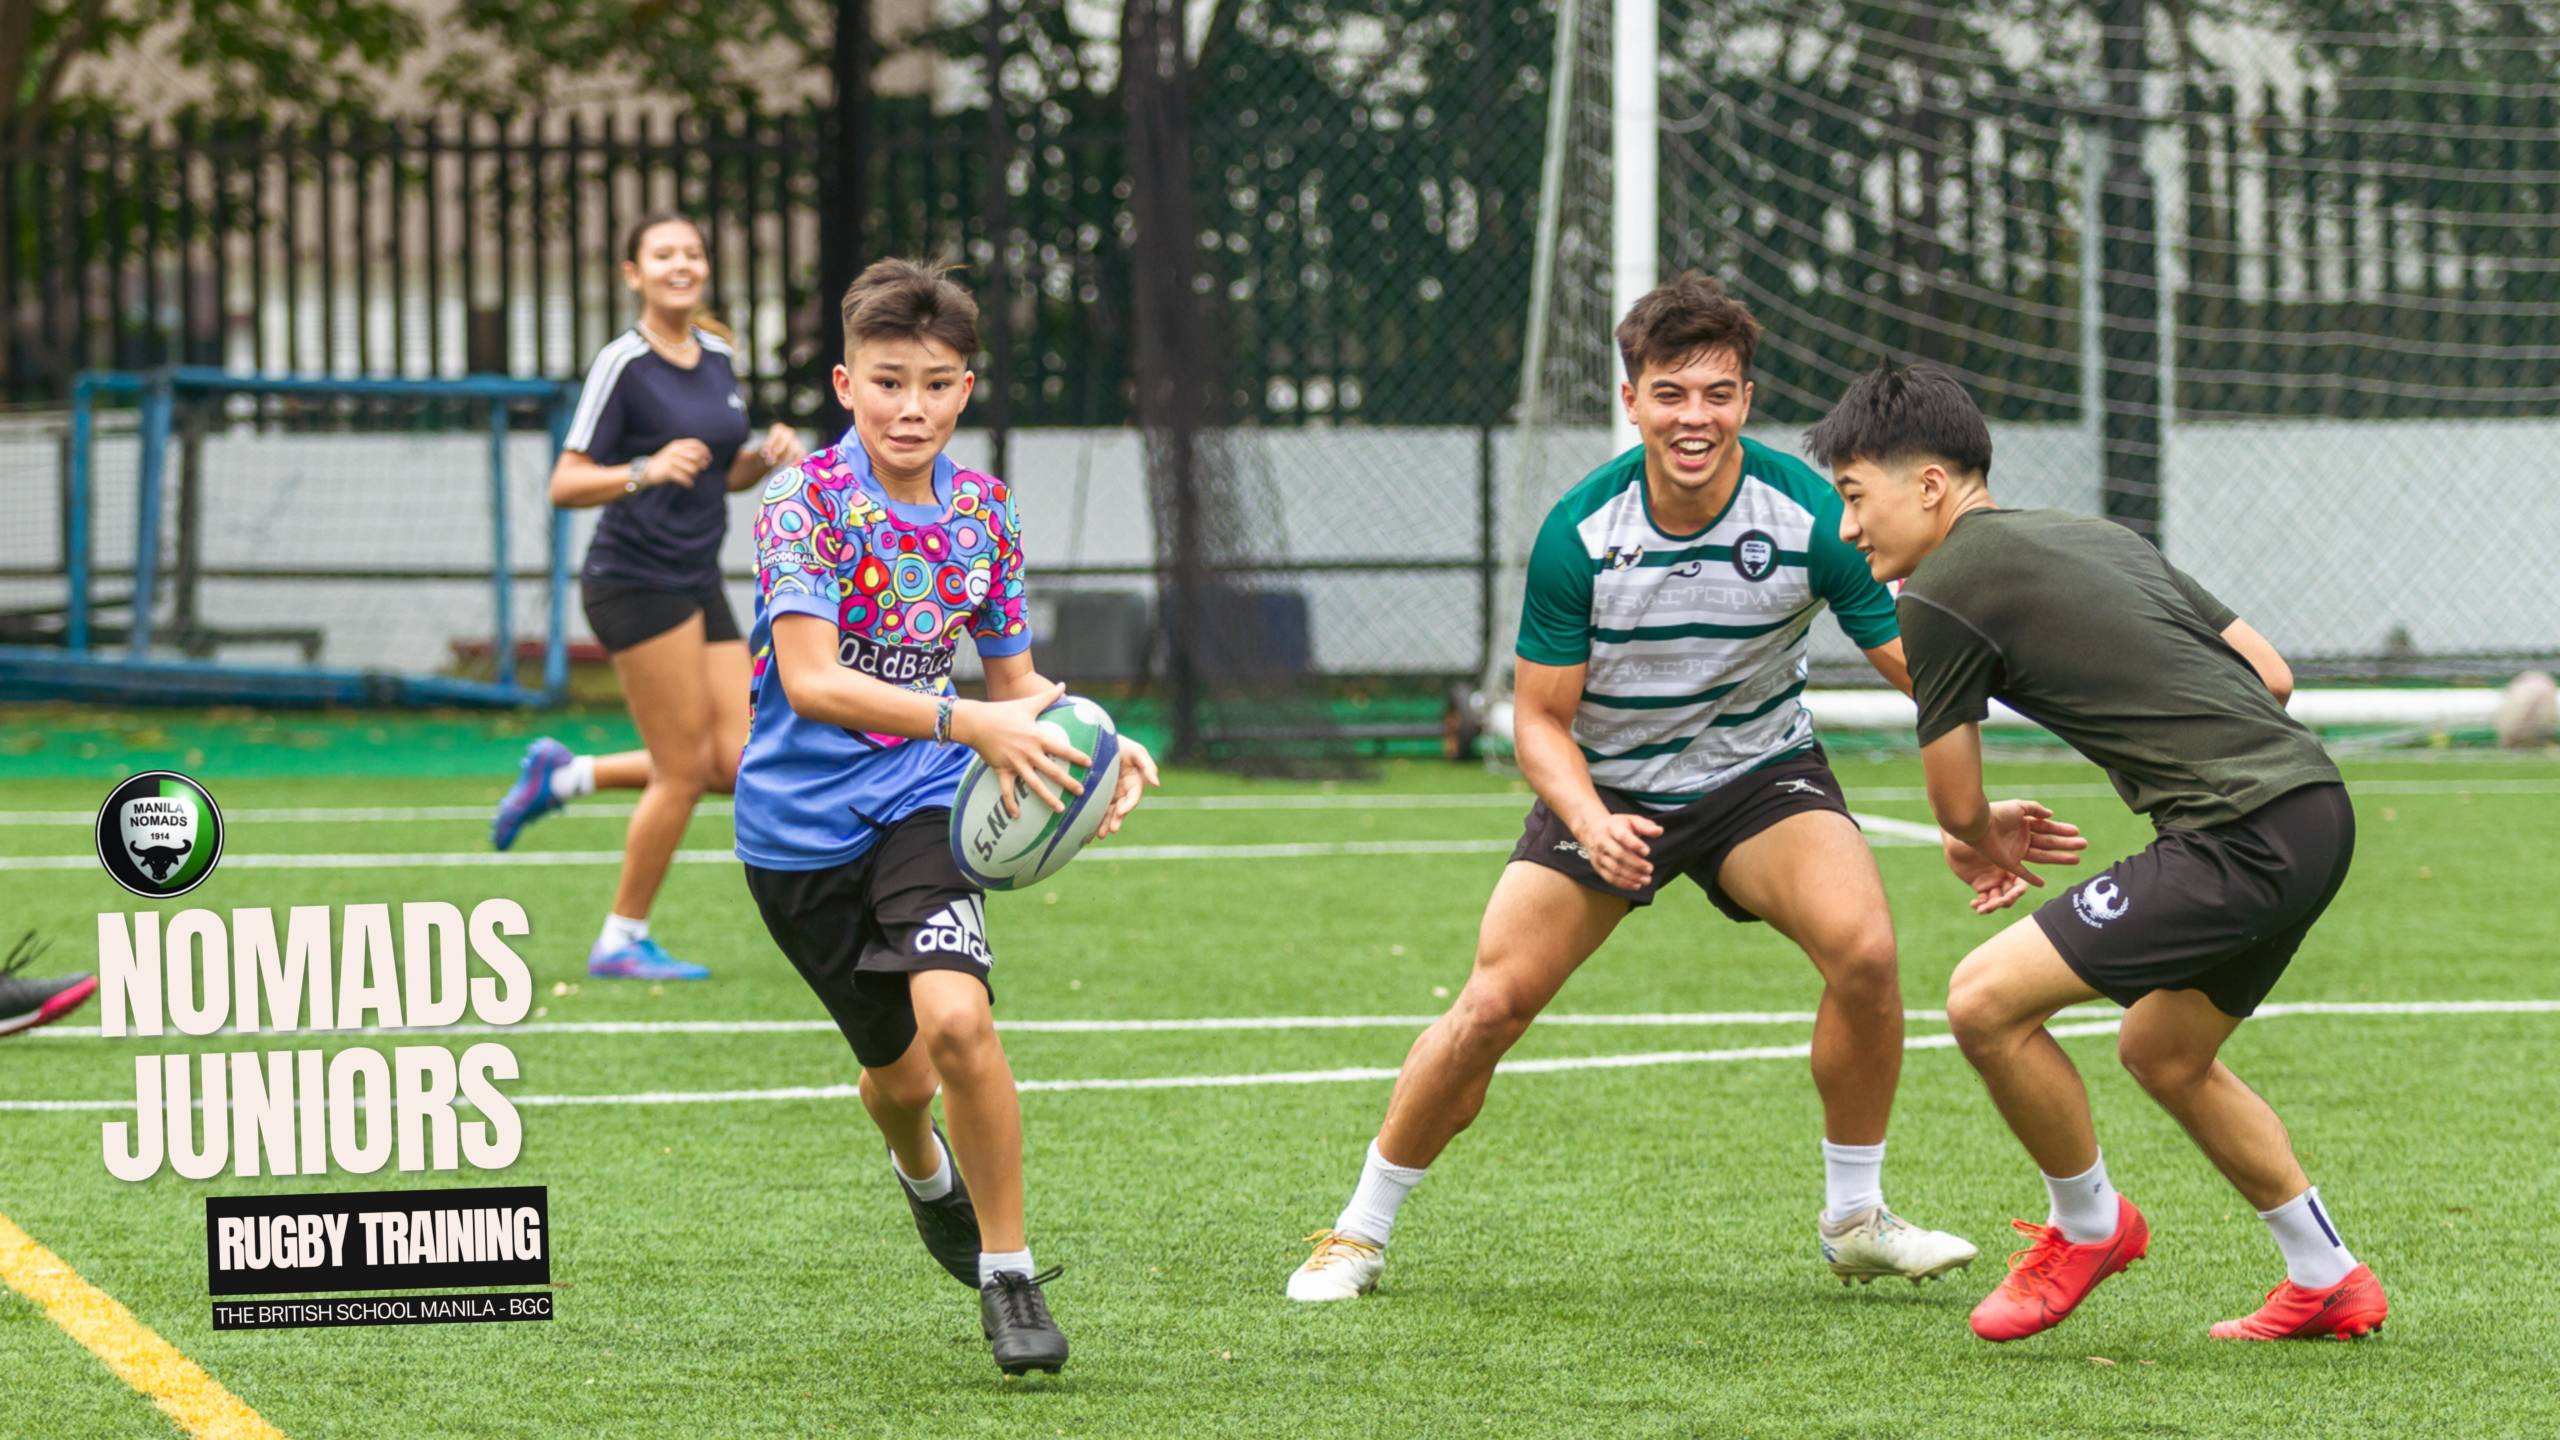 Nomads Juniors: The Many Benefits of Rugby for Youth Athletes